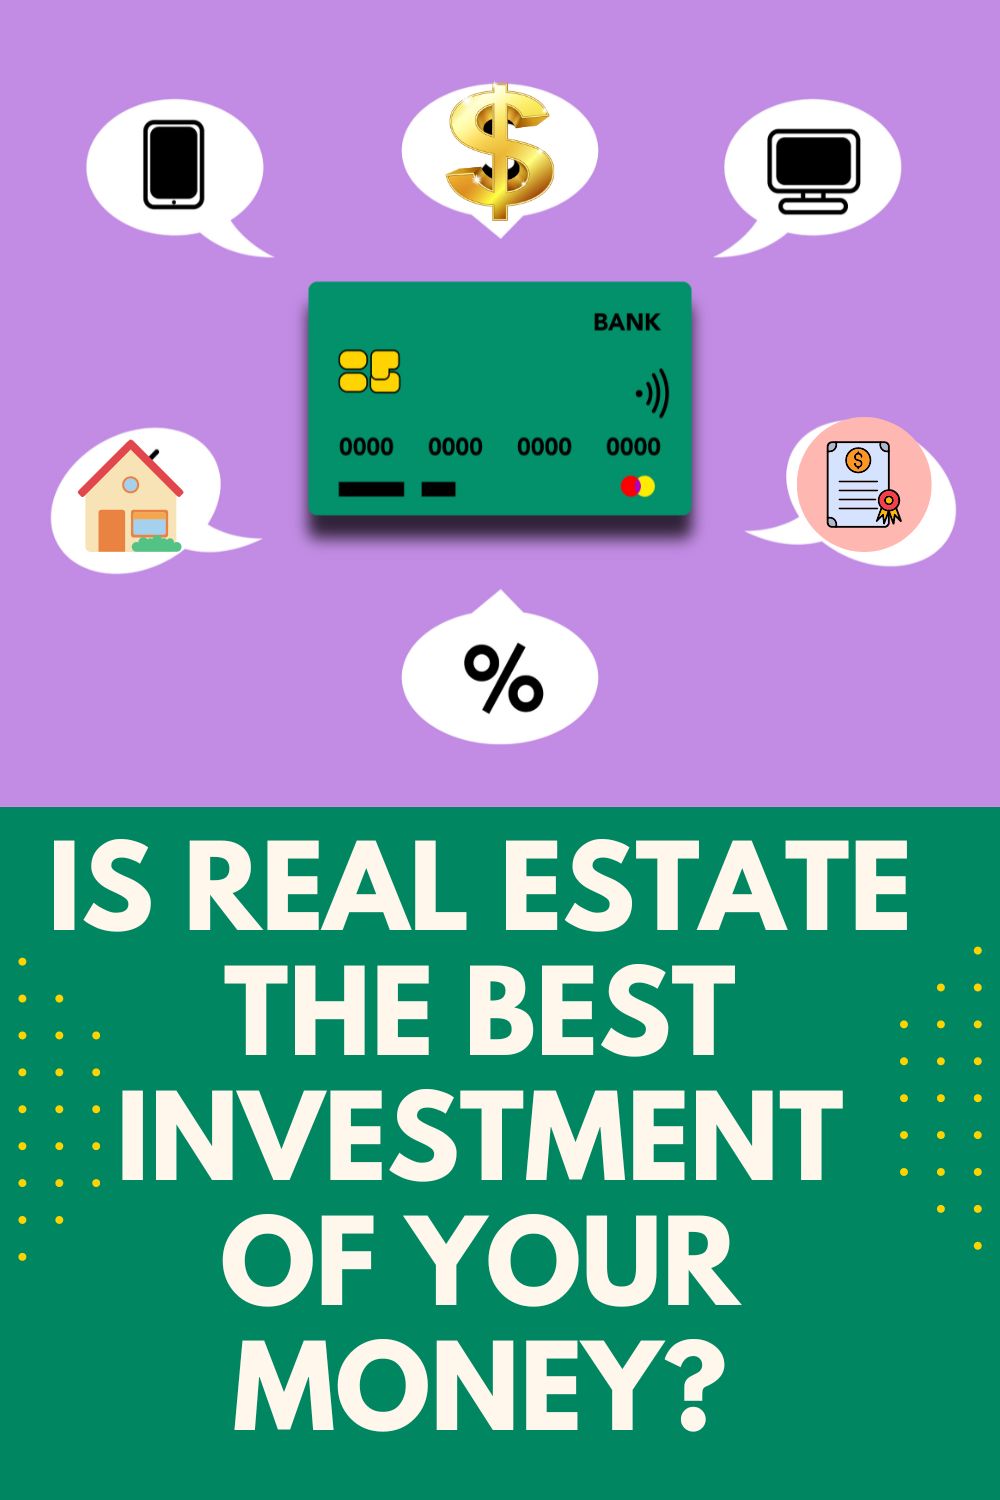 Is Real Estate the Best Investment of Your Money?